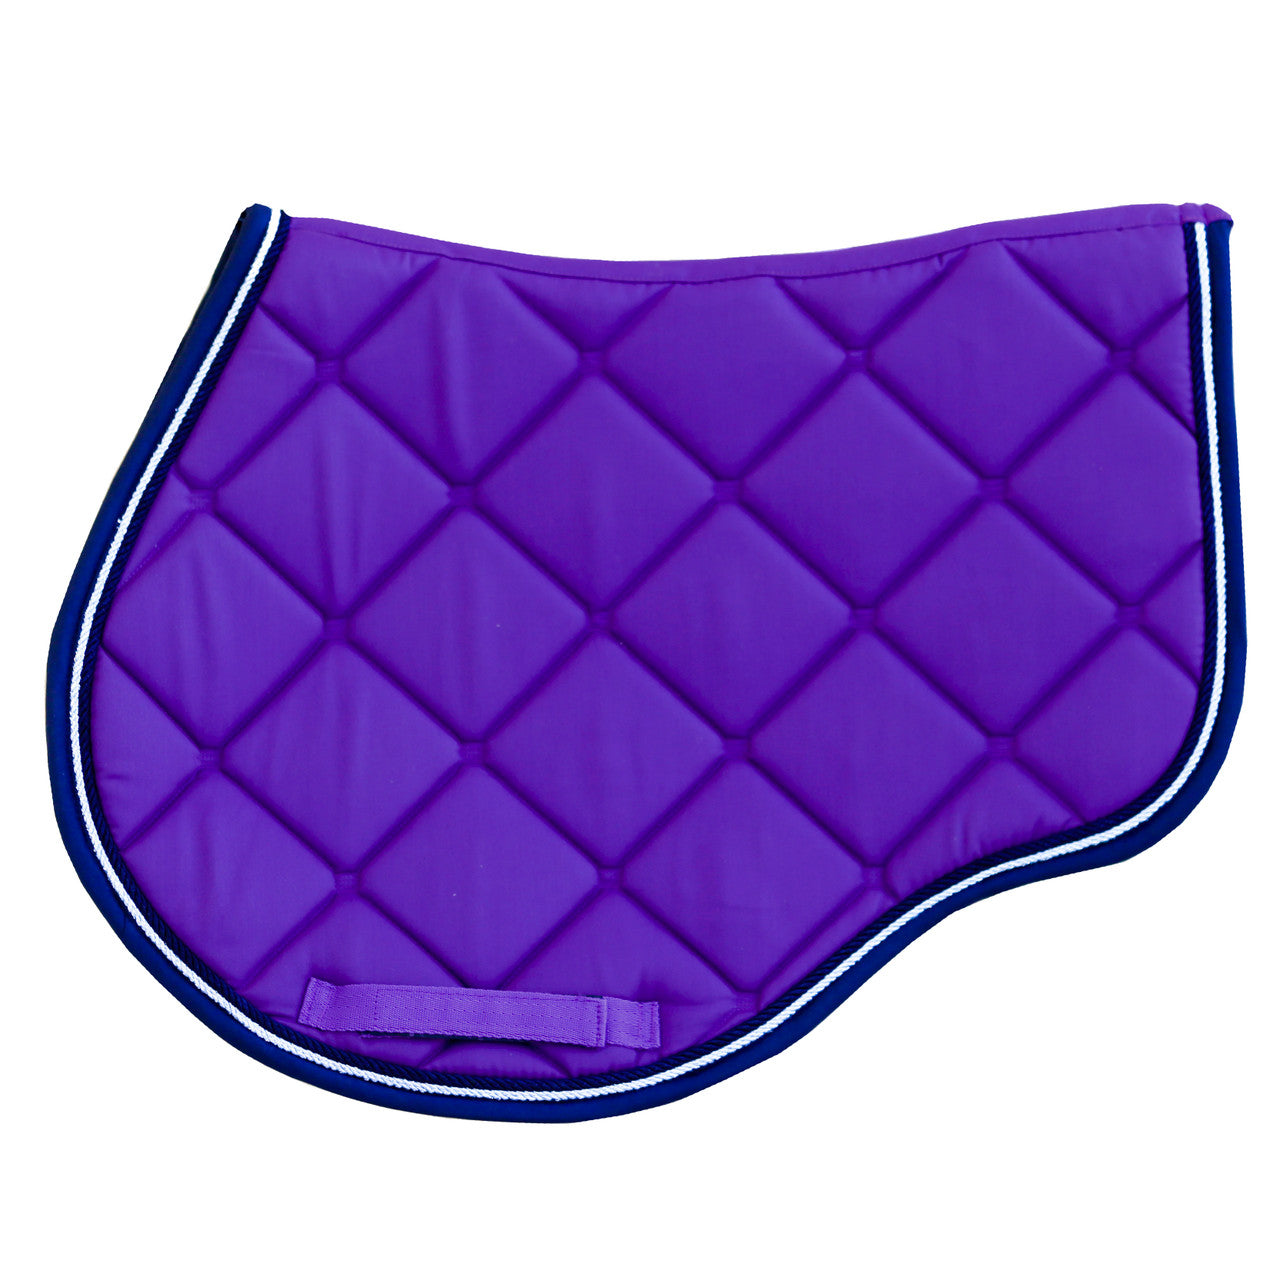 AP Saddle Pad - Purple / Navy w Navy and Silver Cord